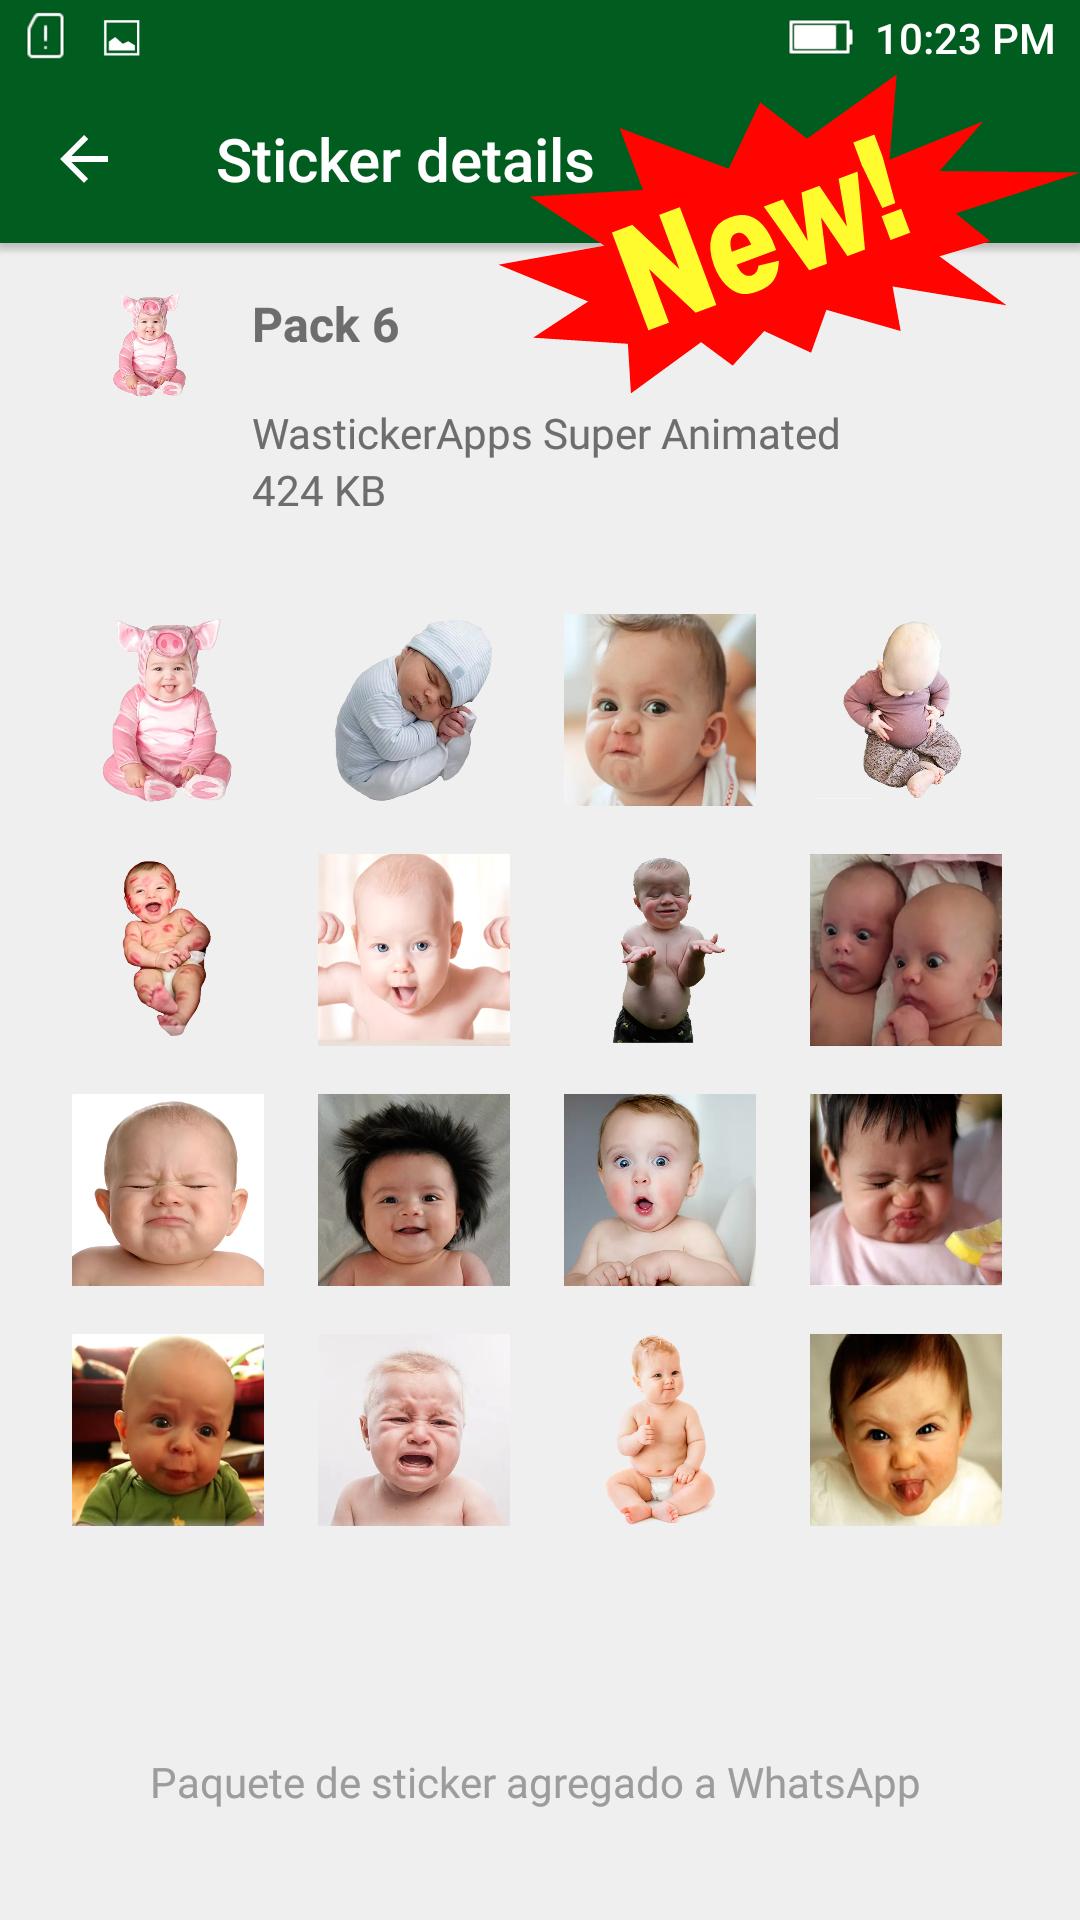 Xd83dxdc76 New Baby Memes Stickers Wastickerapps For Android Apk Download